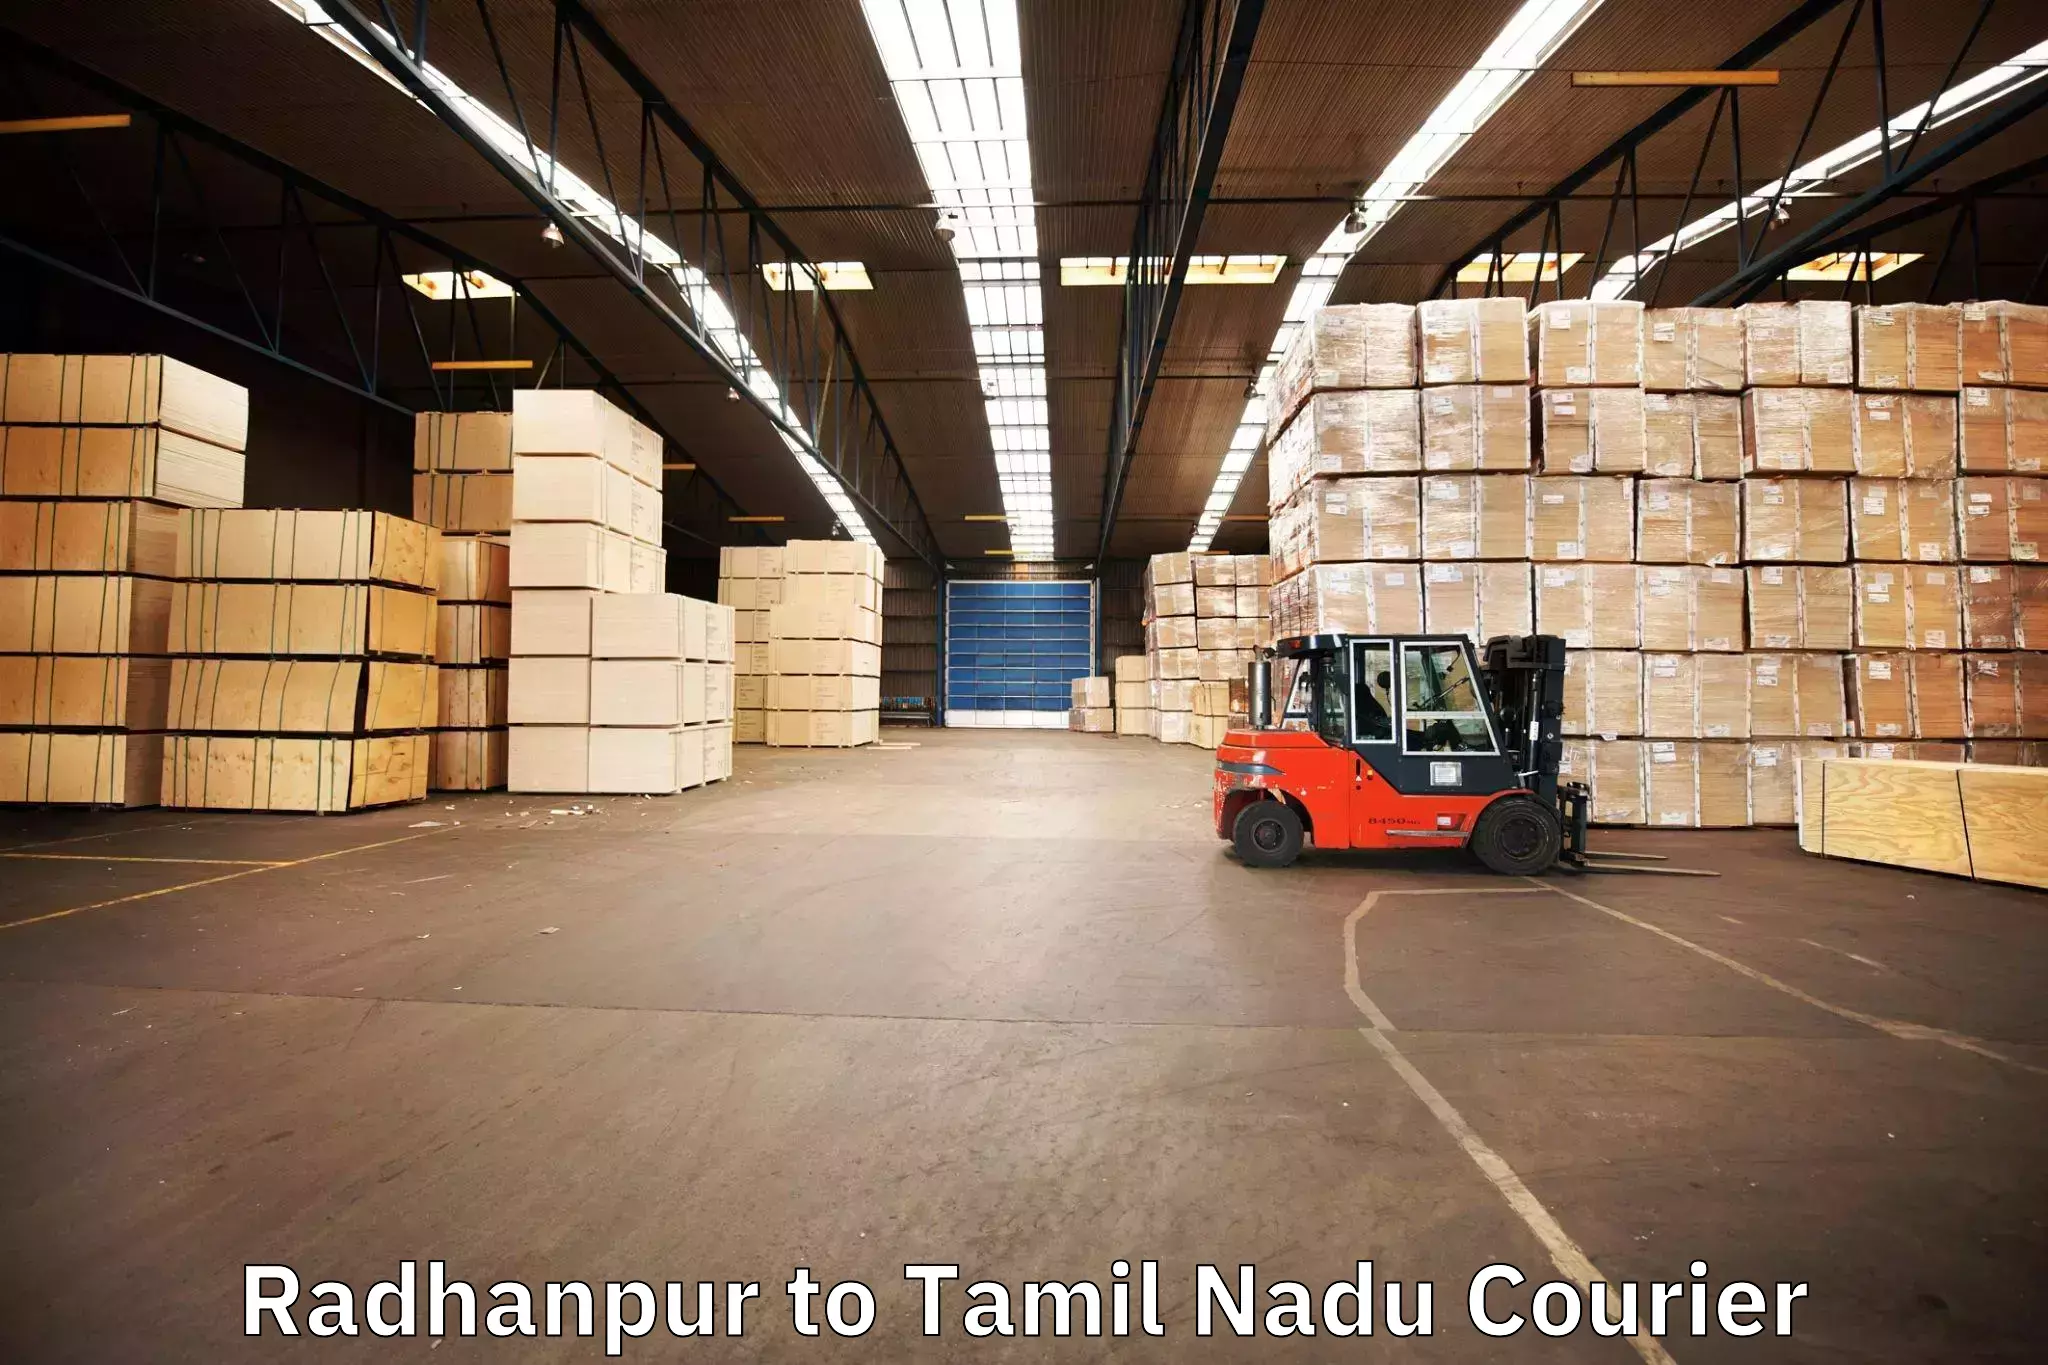 Trusted moving company Radhanpur to Palladam